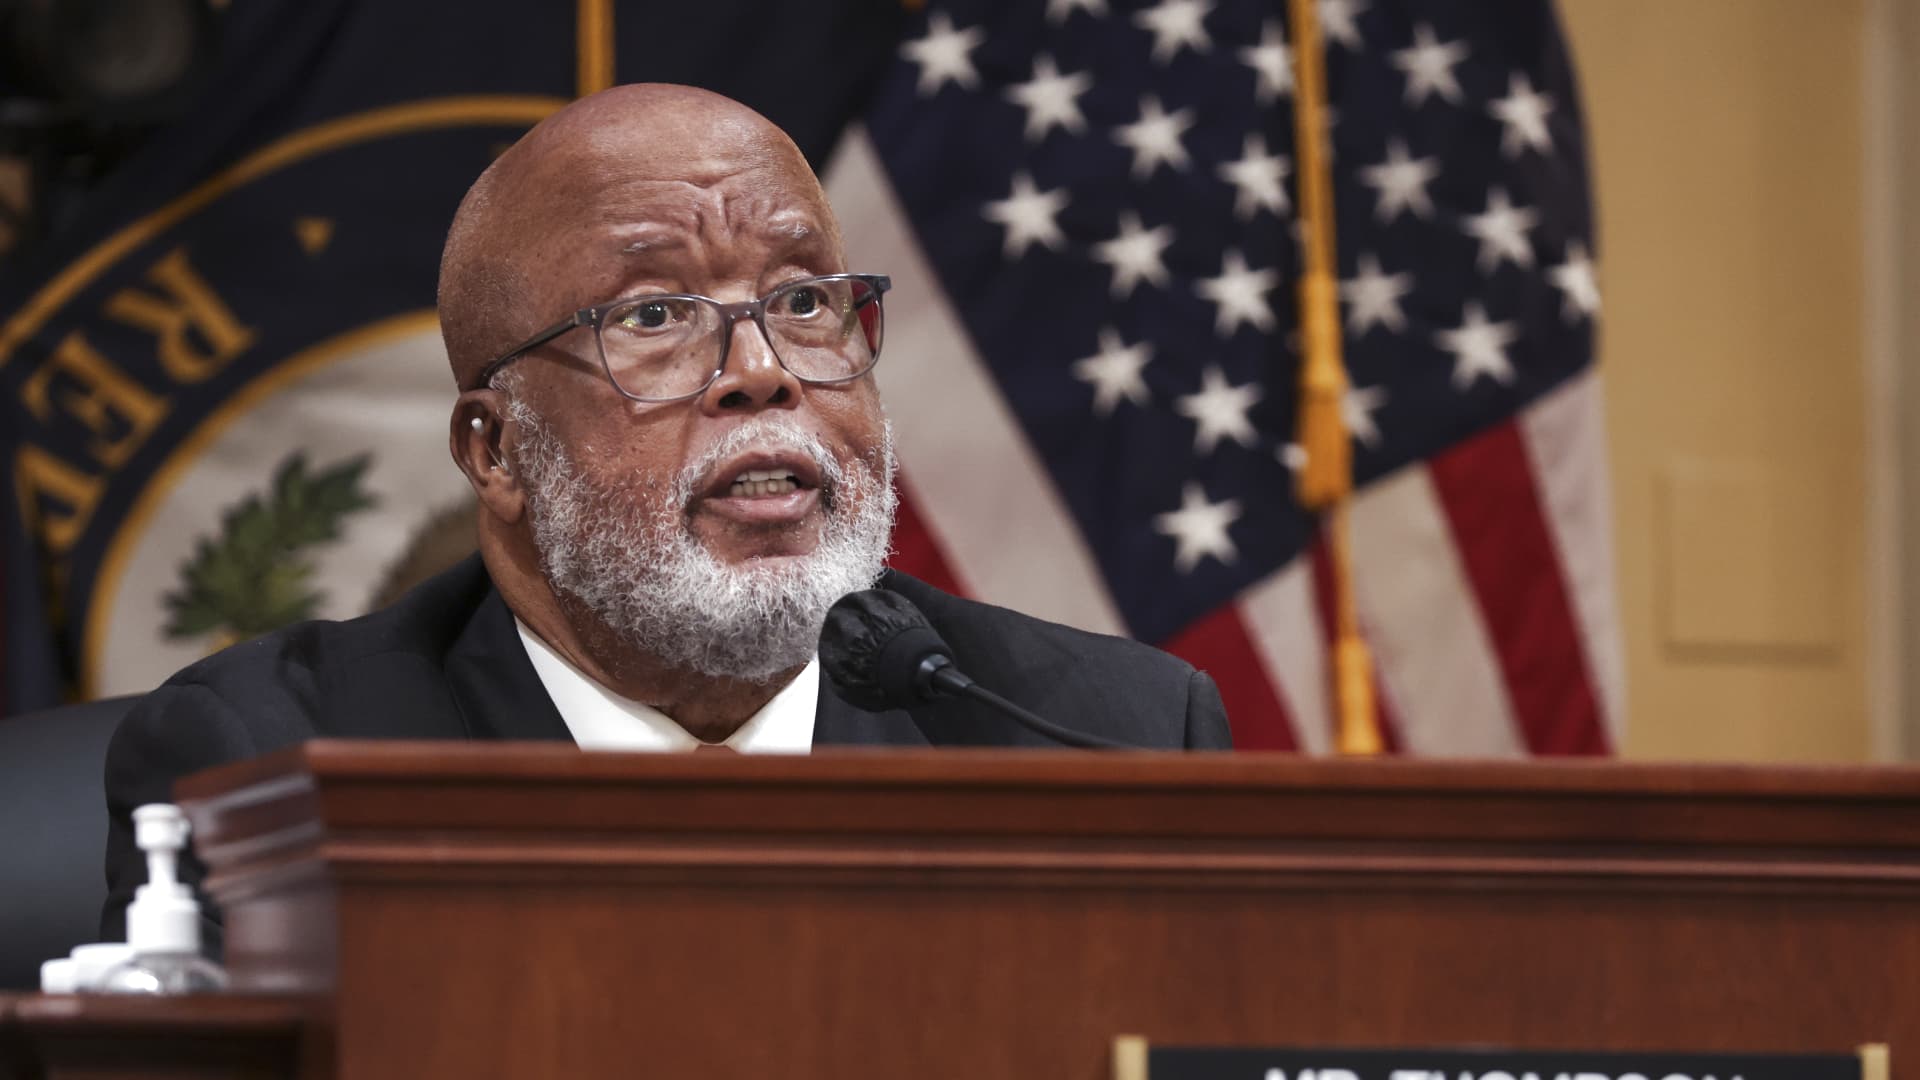 U.S. Rep. Bennie Thompson (D-MS), Chair of the House Select Committee to Investigate the January 6th Attack on the U.S. Capitol, delivers remarks during a hearing on the January 6th investigation in the Cannon House Office Building on October 13, 2022 in Washington, DC.